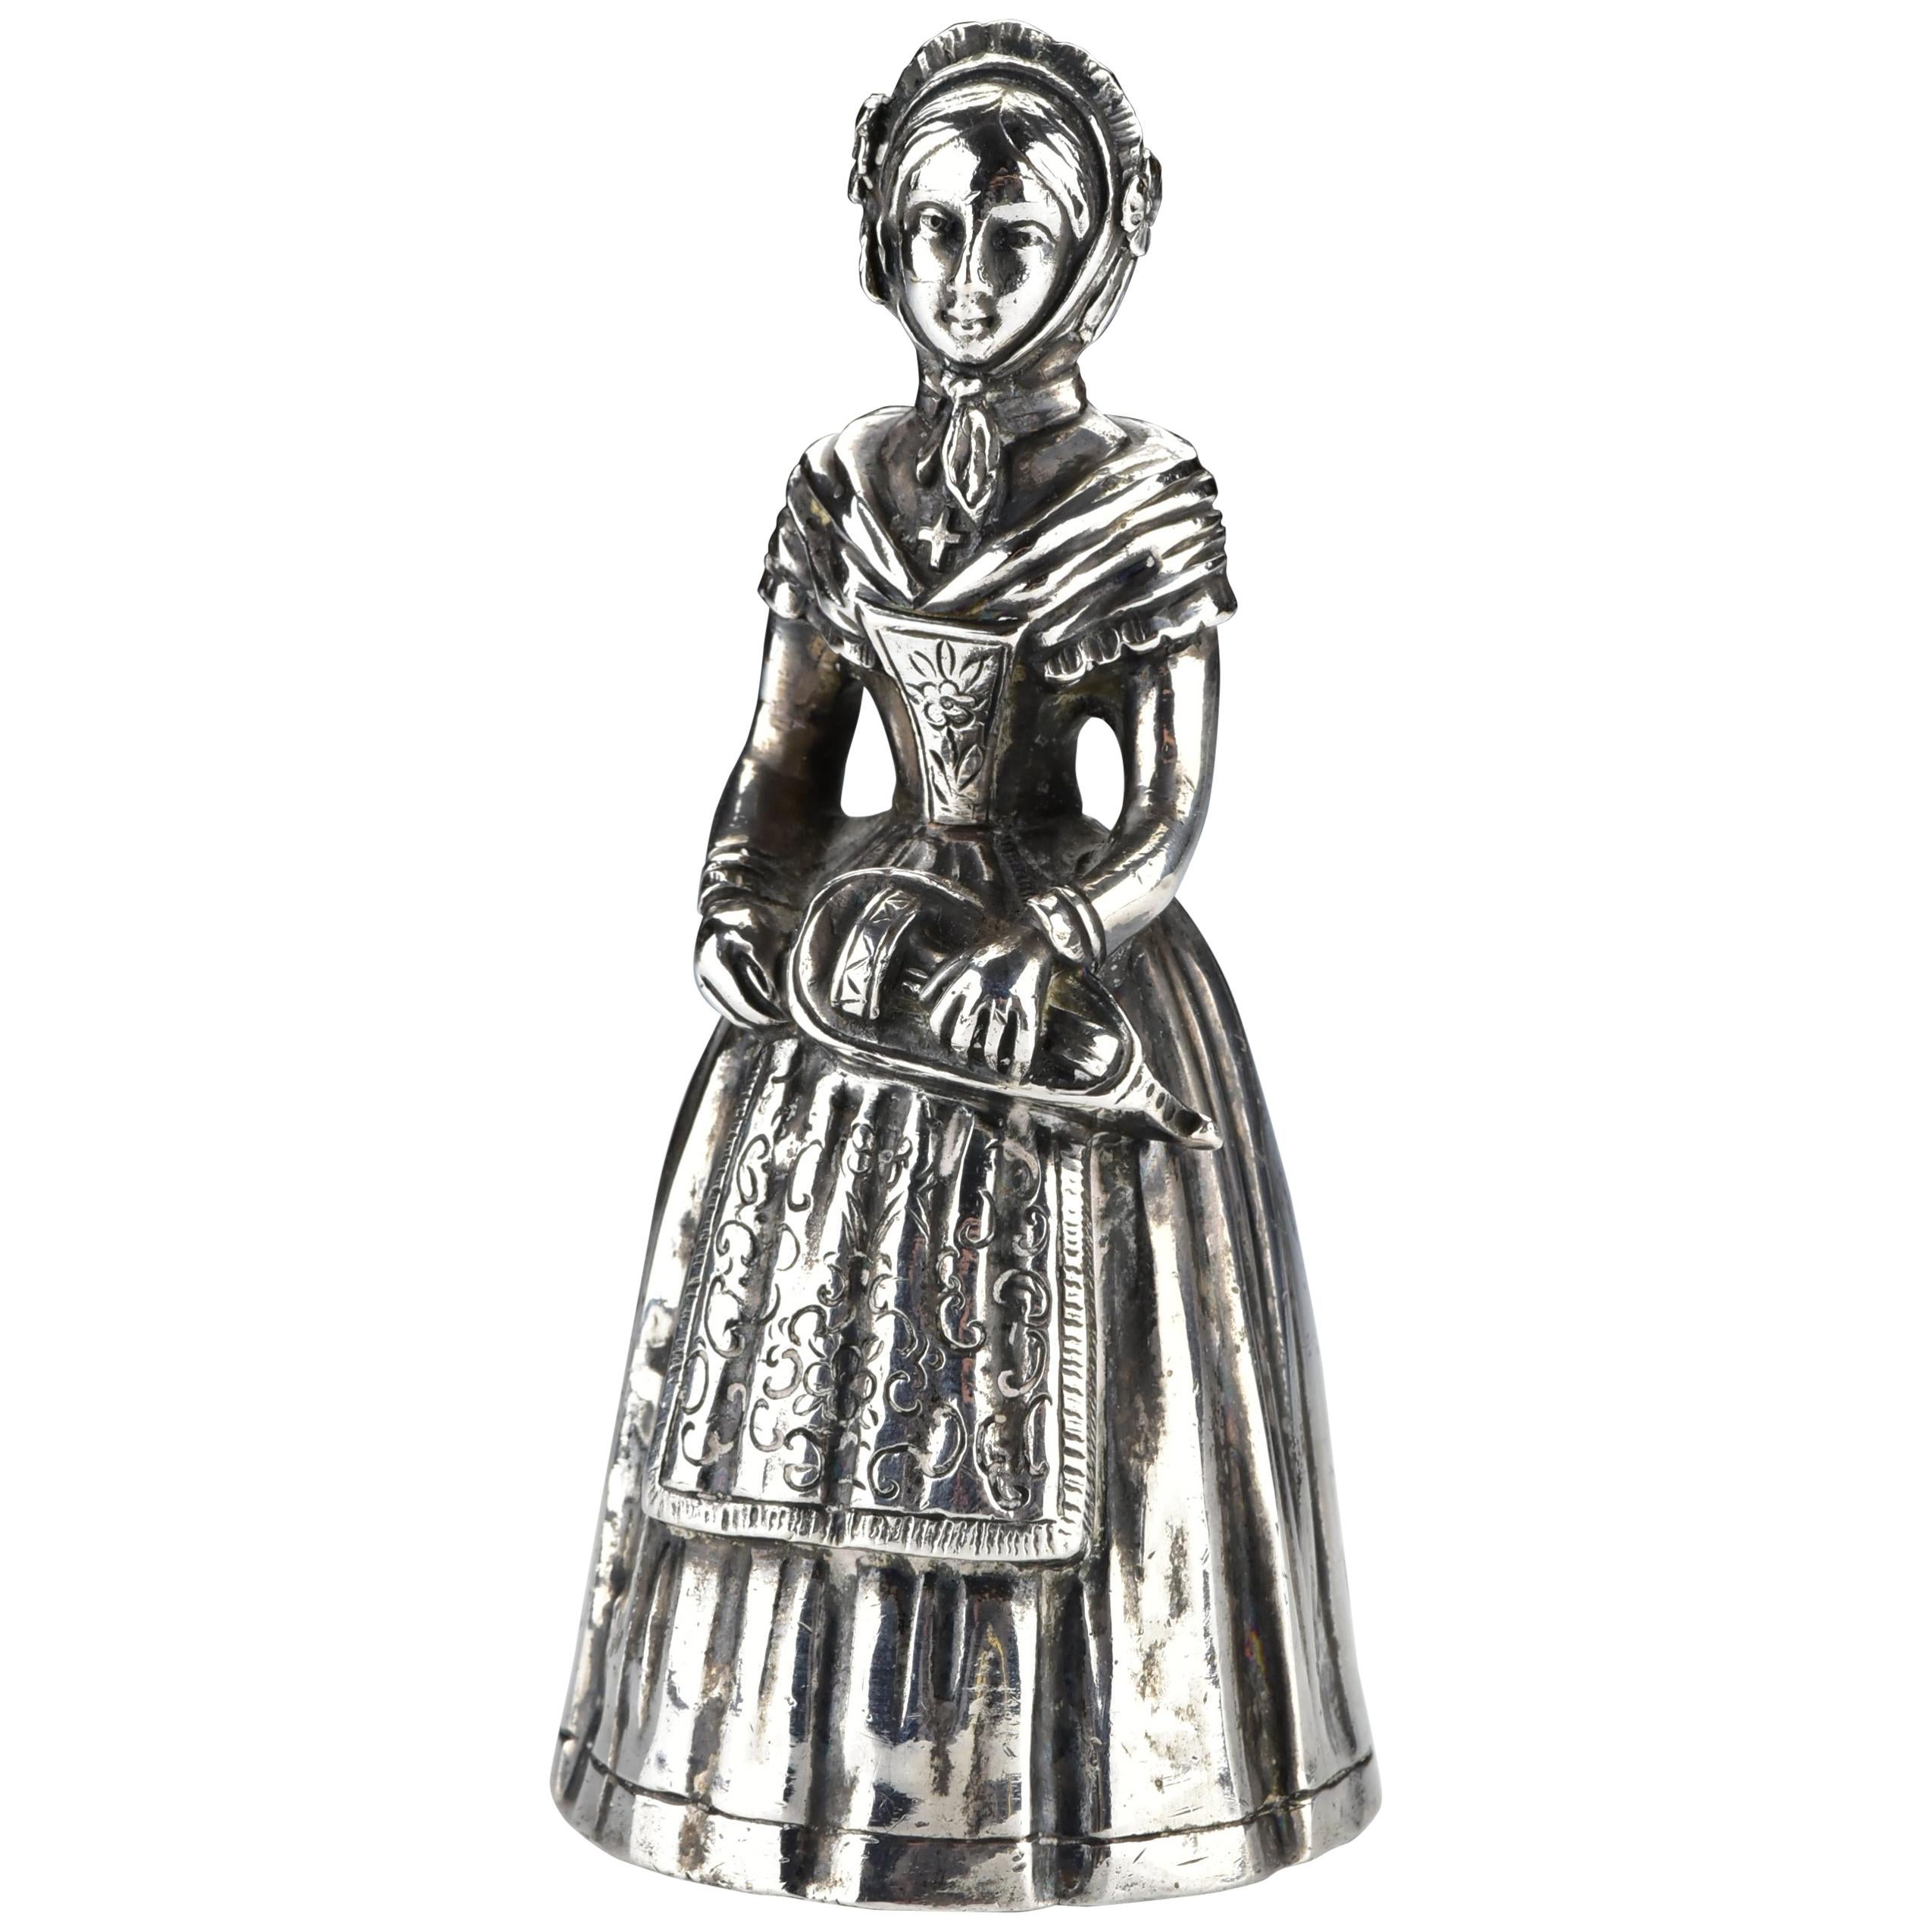 18th Century German Silver Figural Woman Dinner Bell with Kassel City Mark